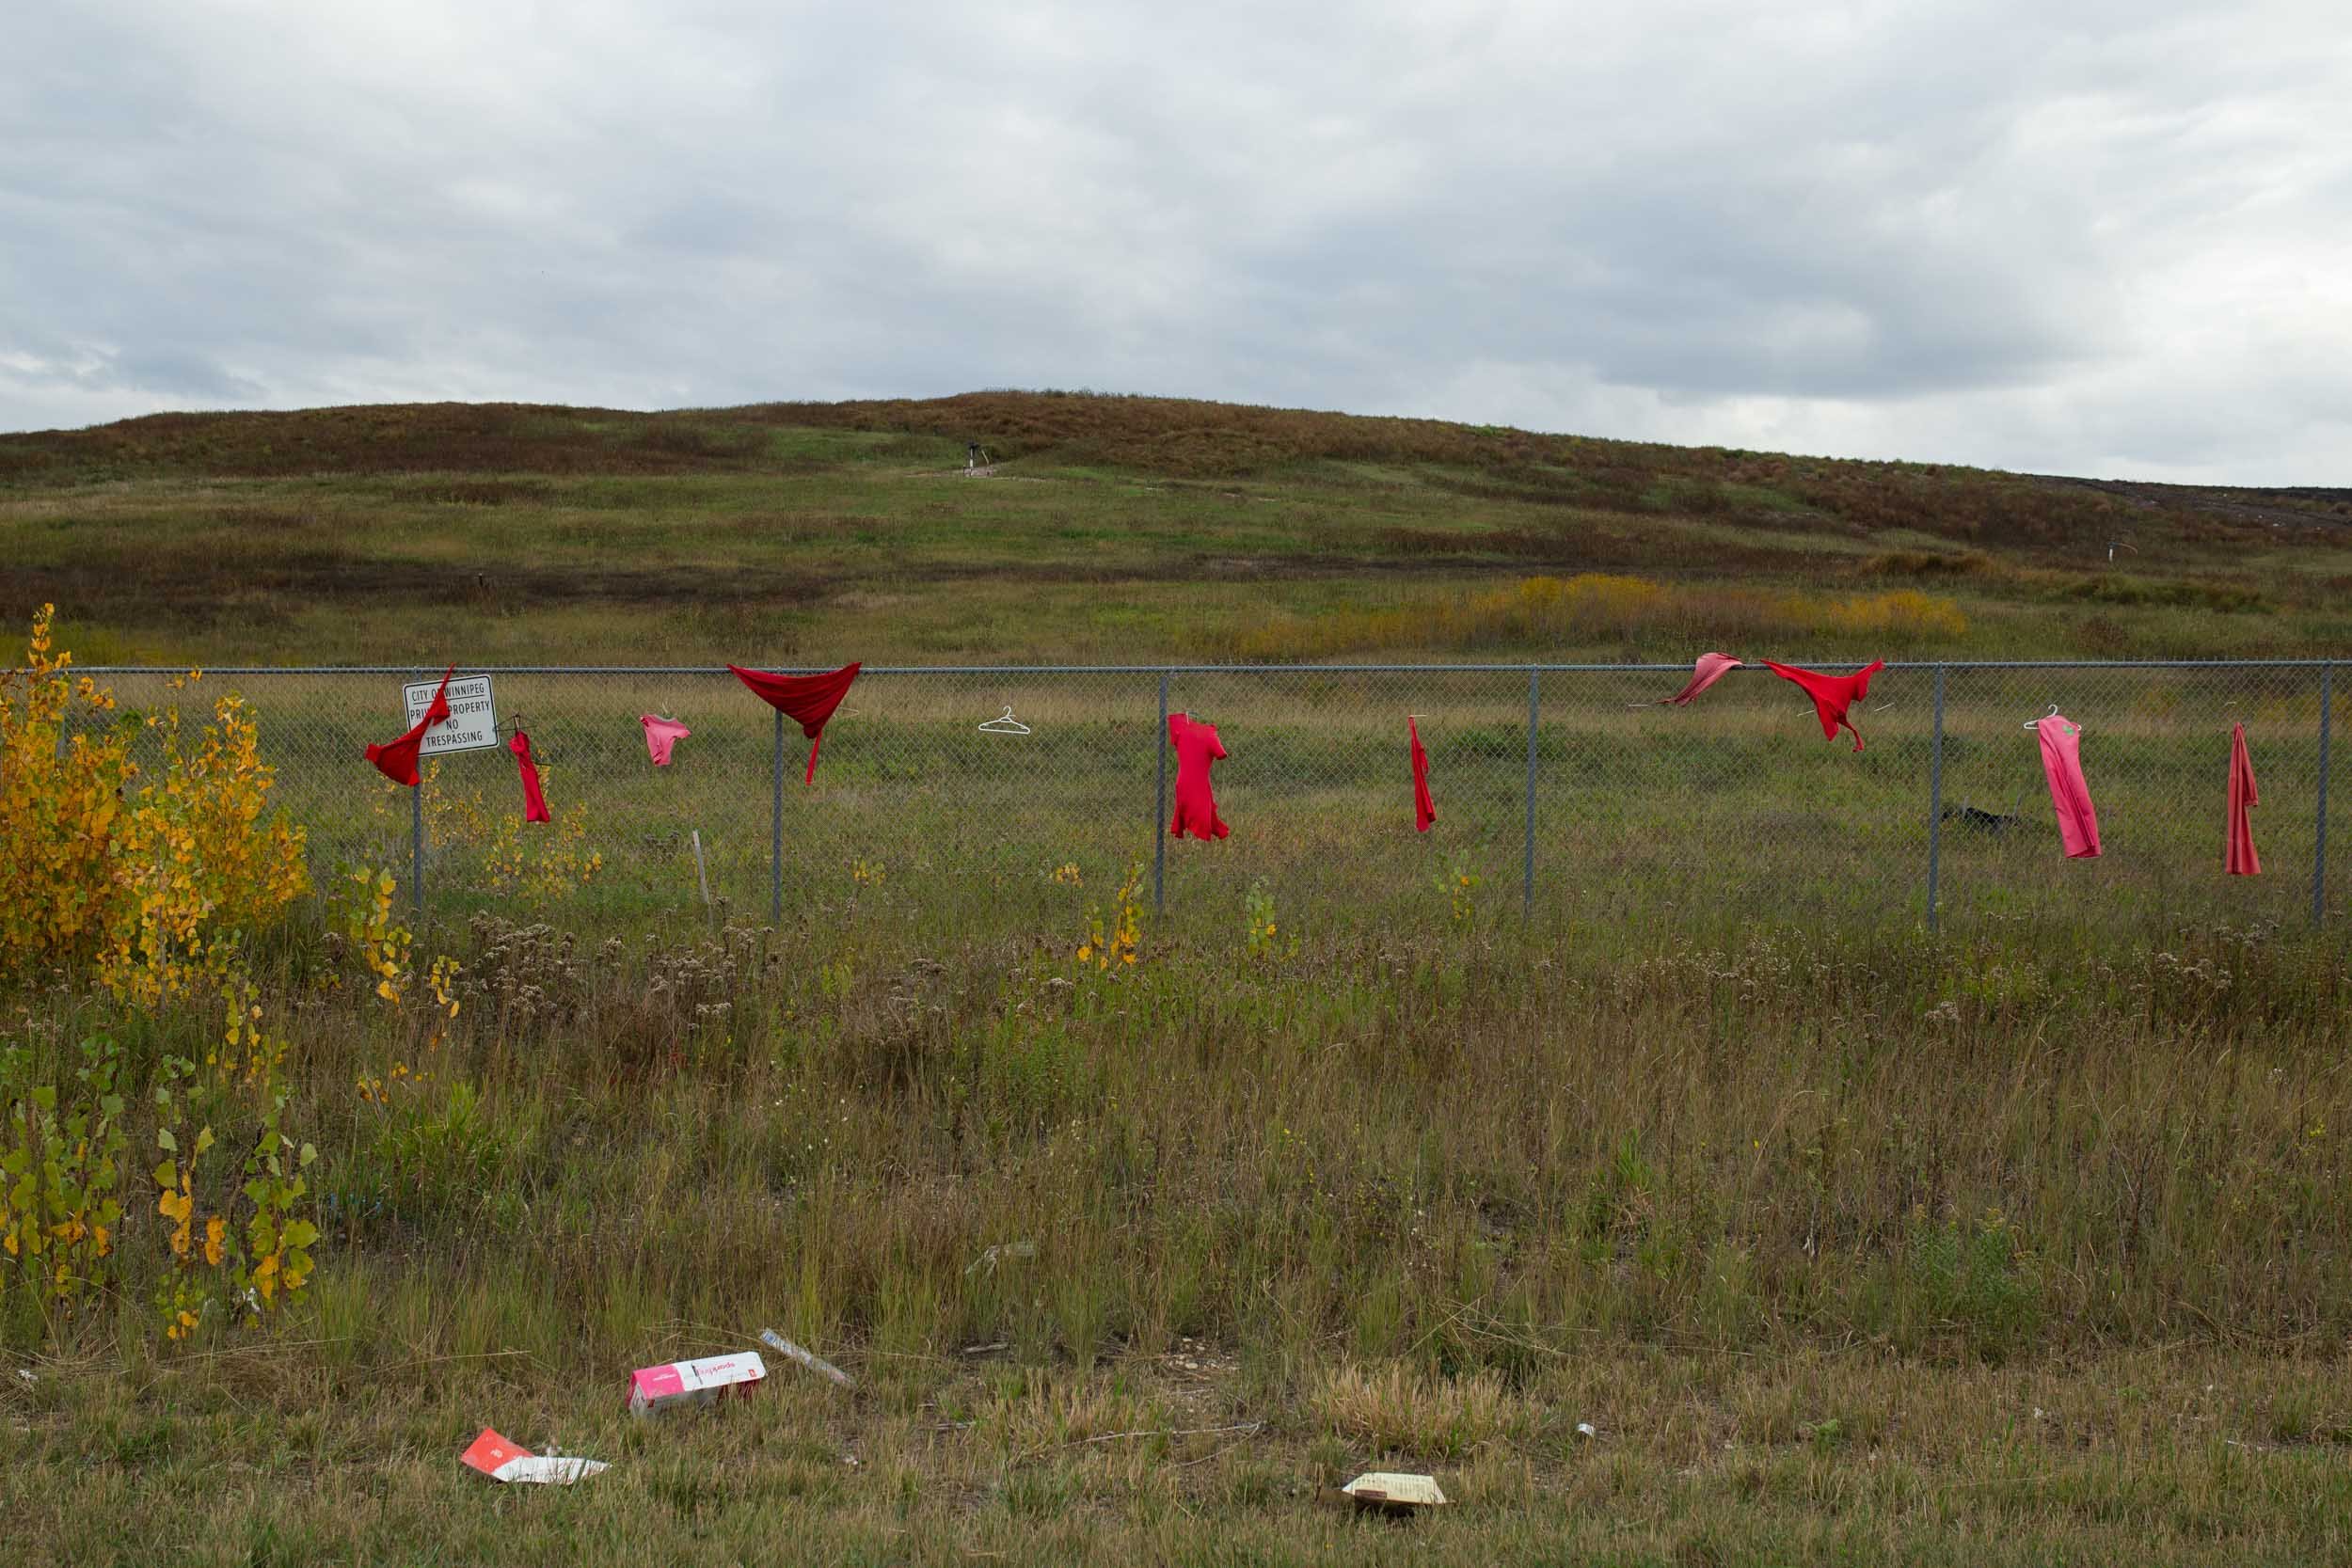  Up the road from Camp Morgan and in front of Brady Landfill, red dresses hang along the fence in memorial and advocacy for MMIWG2S. They were initially hung by the community as one of the earlier demonstrations and calls to action to  search the lan